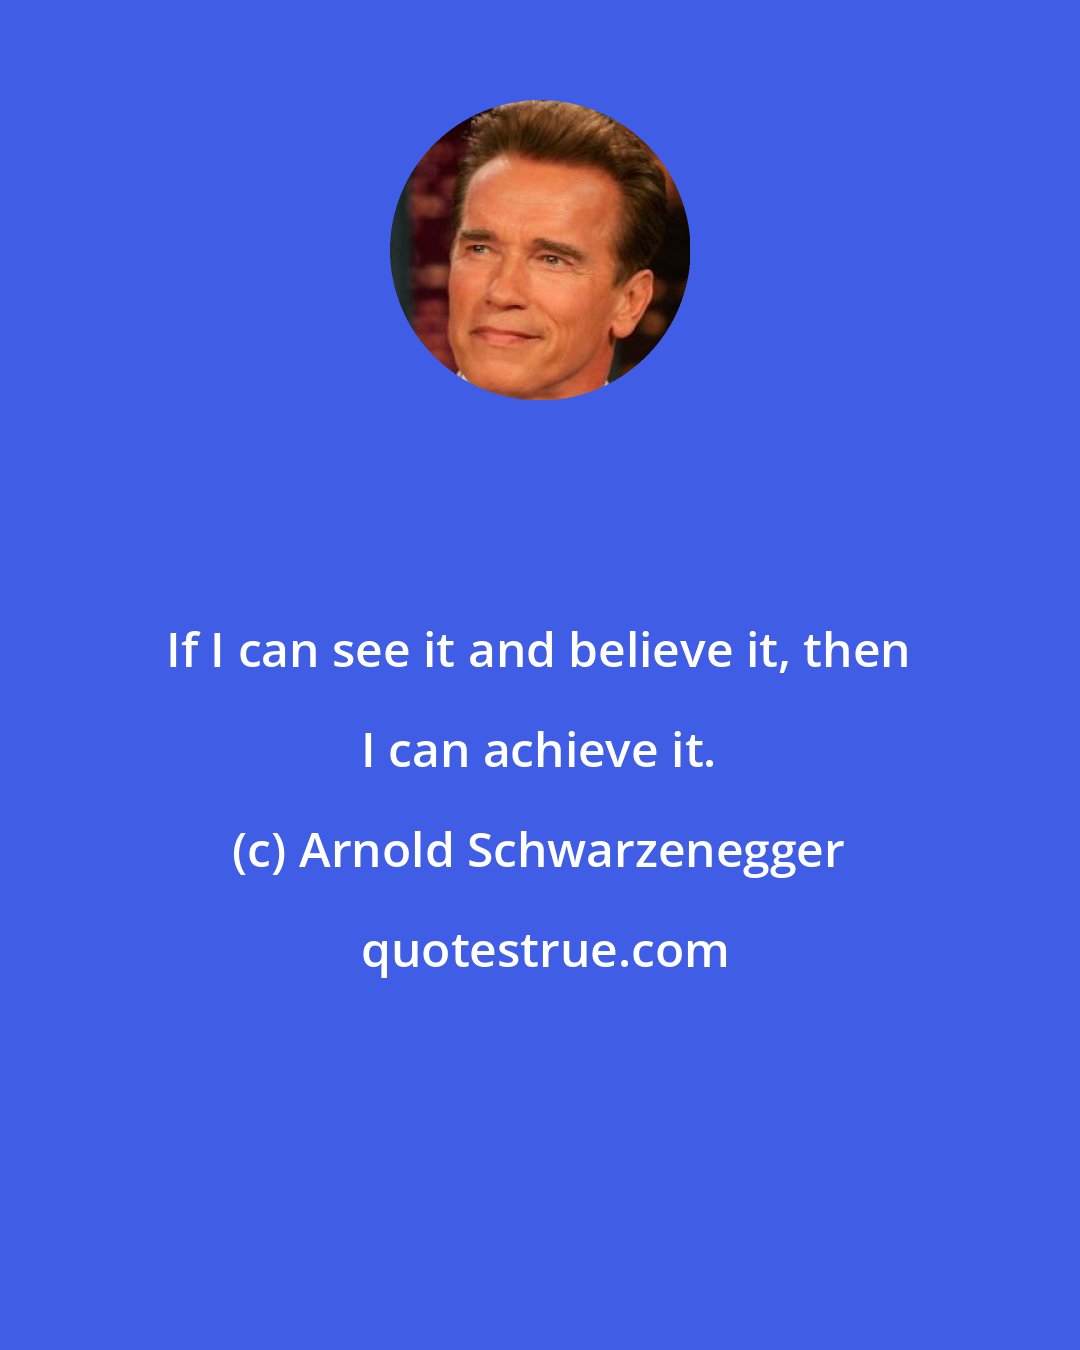 Arnold Schwarzenegger: If I can see it and believe it, then I can achieve it.